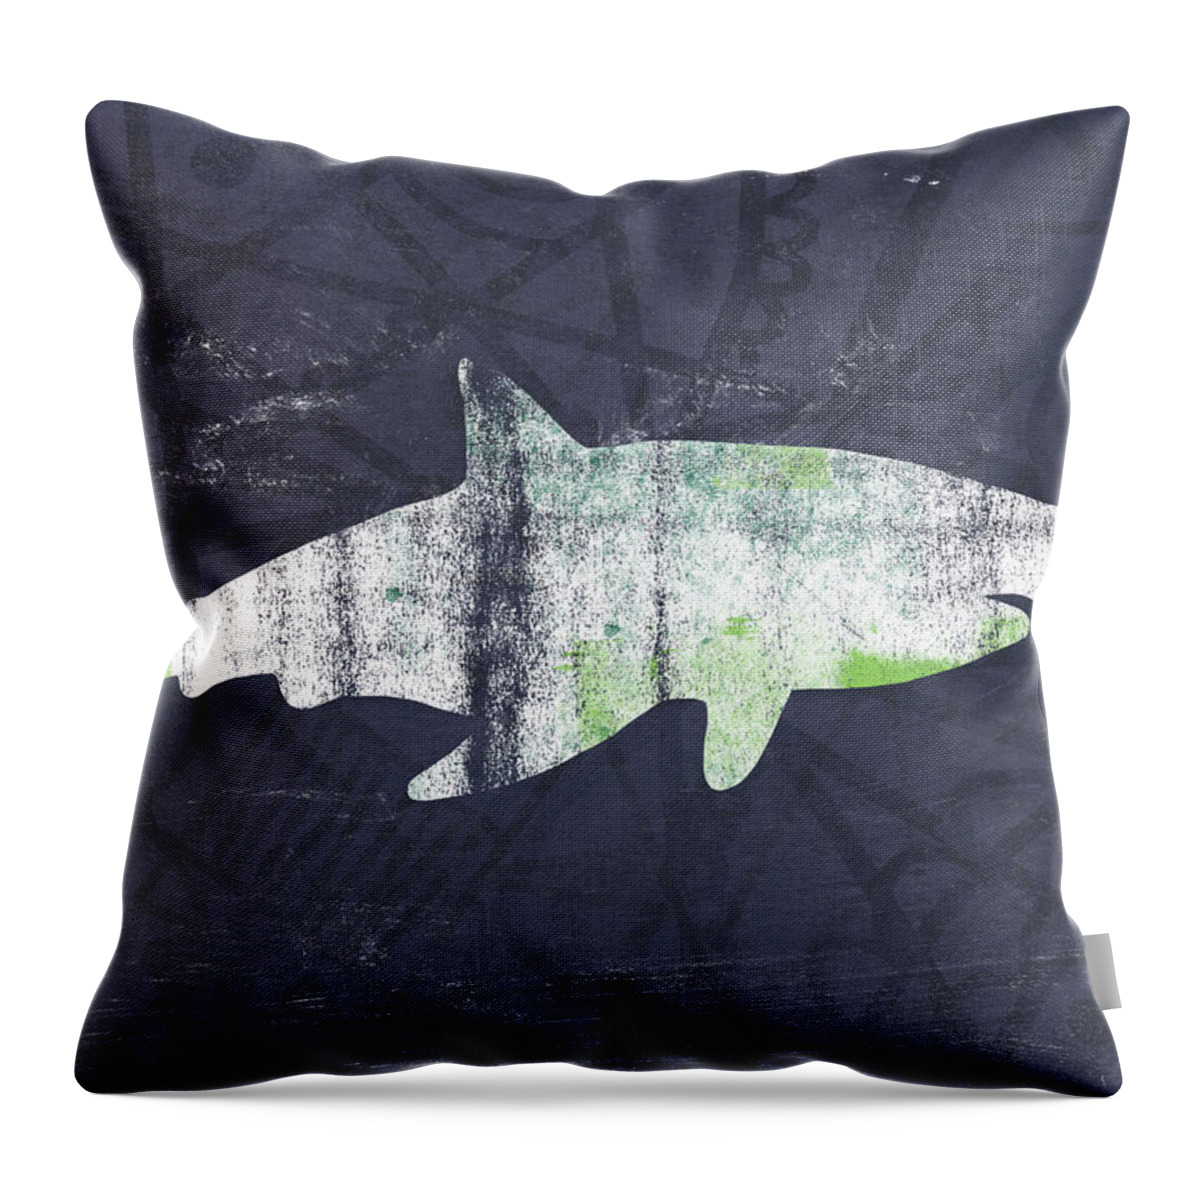 Shark Throw Pillow featuring the painting White Shark- Art by Linda Woods by Linda Woods